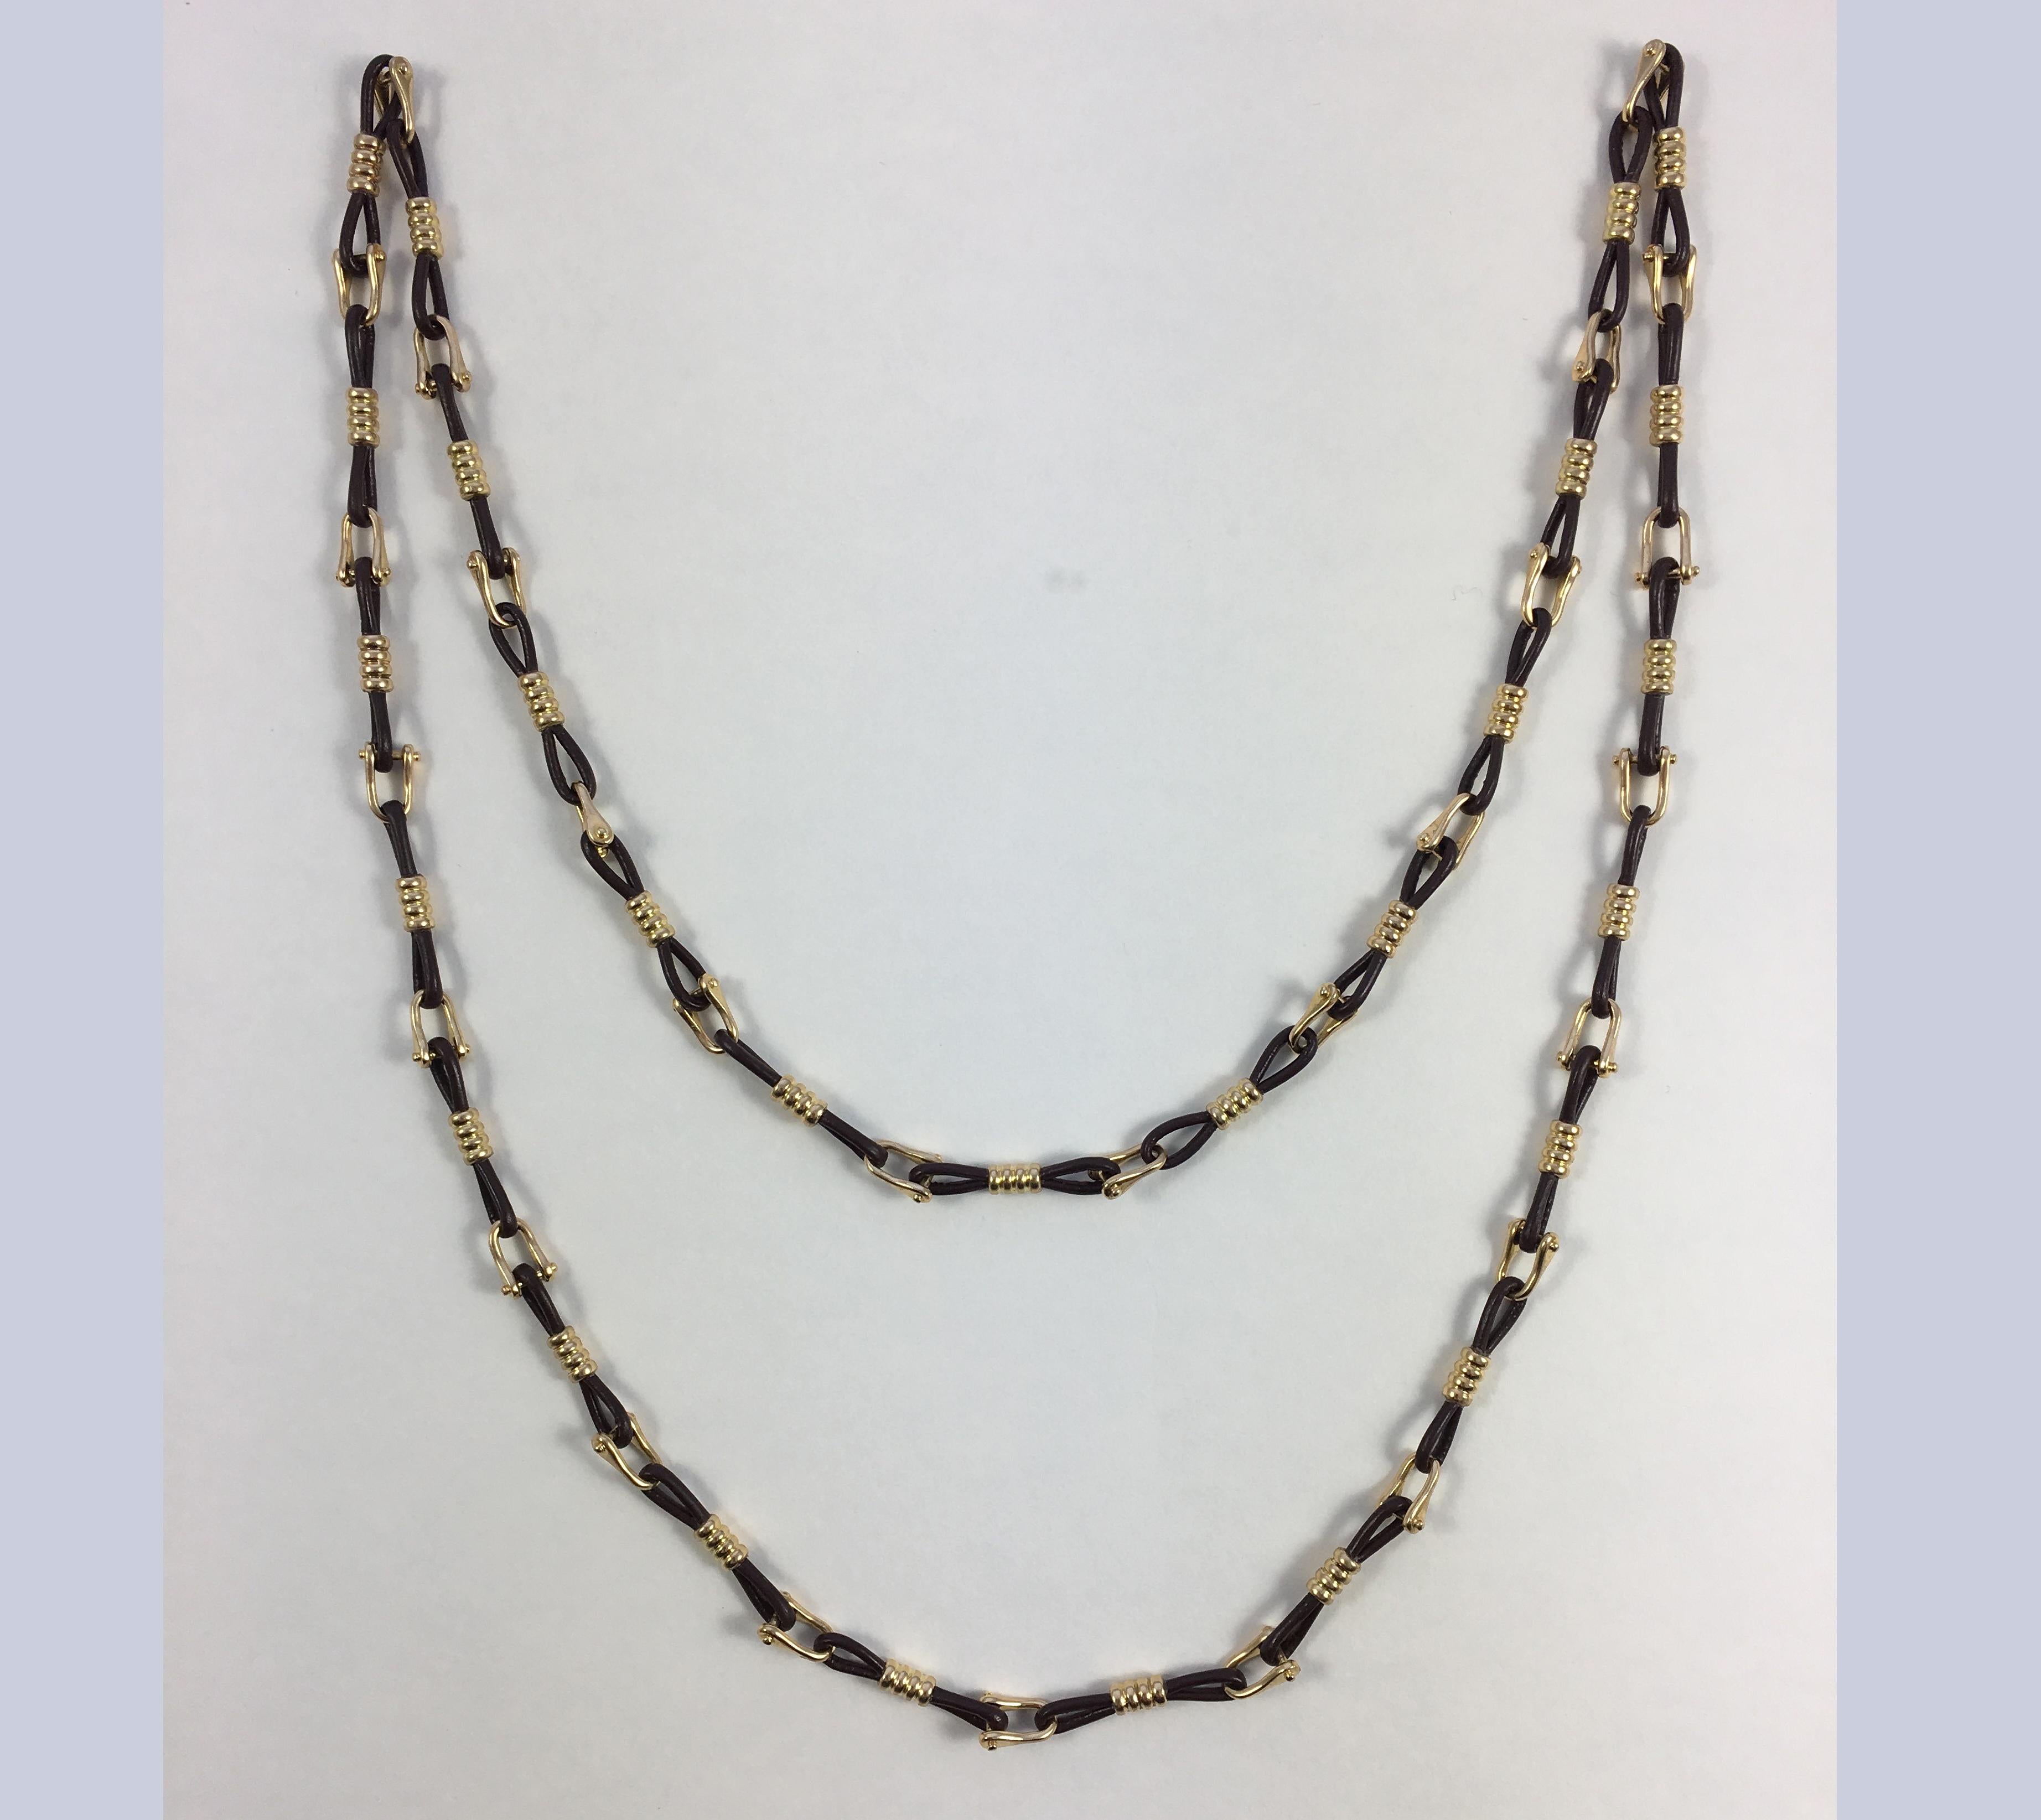 A very smart necklace by Boucheron Paris designed as gold stirrups separated by dark brown leather cords. Adapted from an original 'Nautilus Theme' necklace, the worn out jute sections have been replaced by leather to give this necklace a modern and